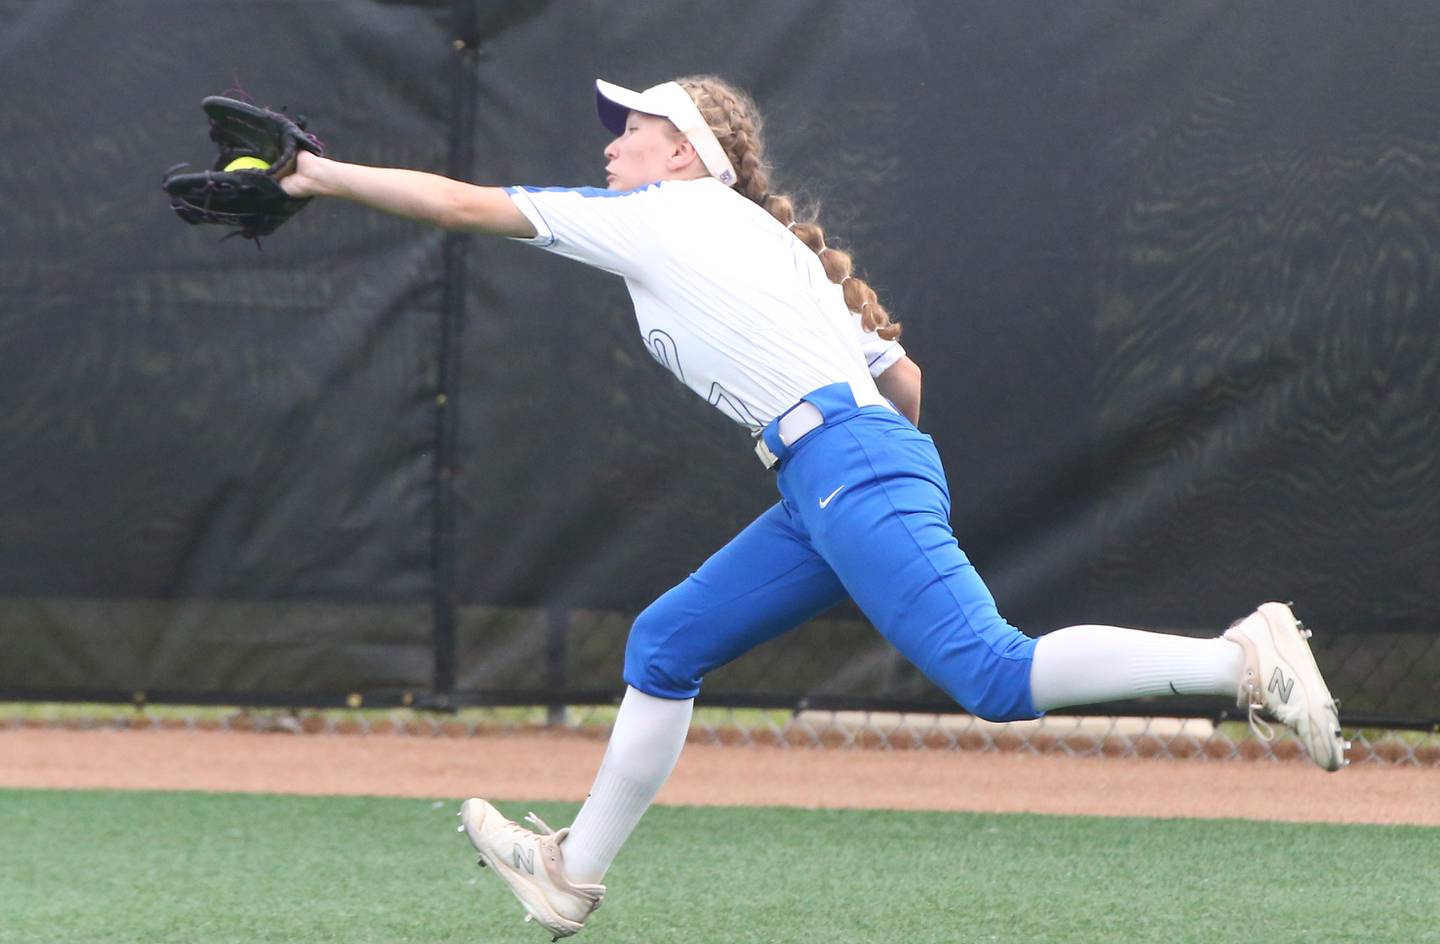 St. Charles North's Ashlee Chantos makes a running catch in the Class 4A softball state championship on Saturday, June 11, 2022 at the Louisville Slugger Complex in Peoria.